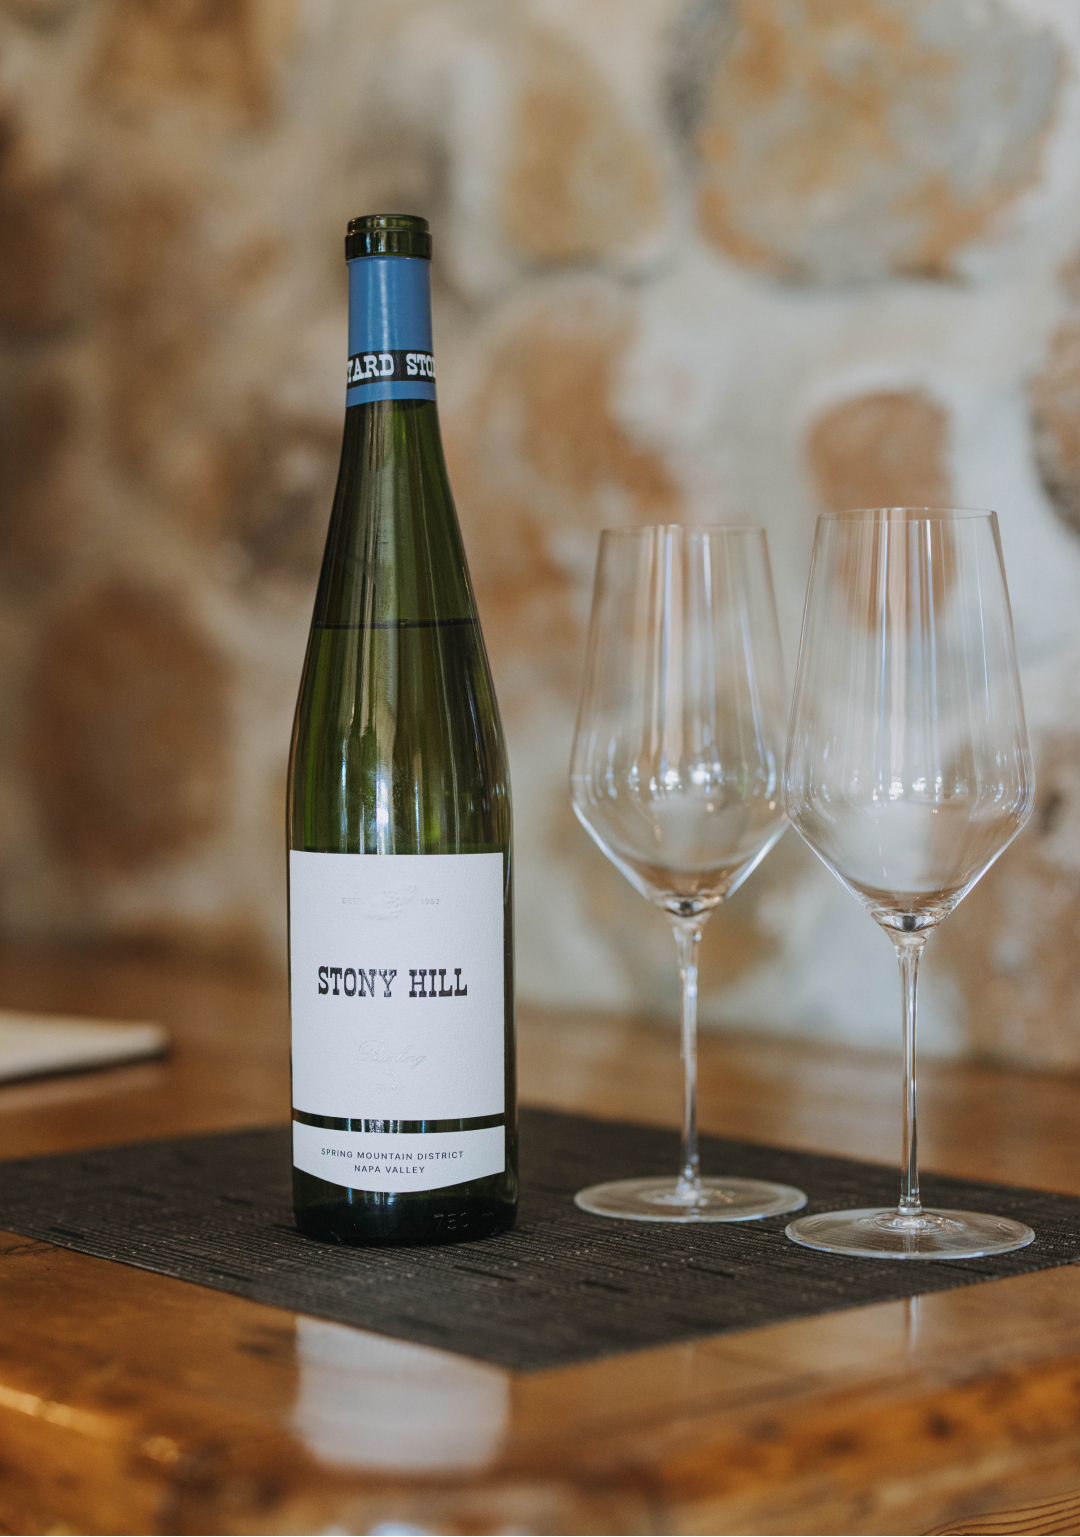 A bottle of Stony Hill wine with two glasses on a table in front op a stone wall at the Stony Hill residence.